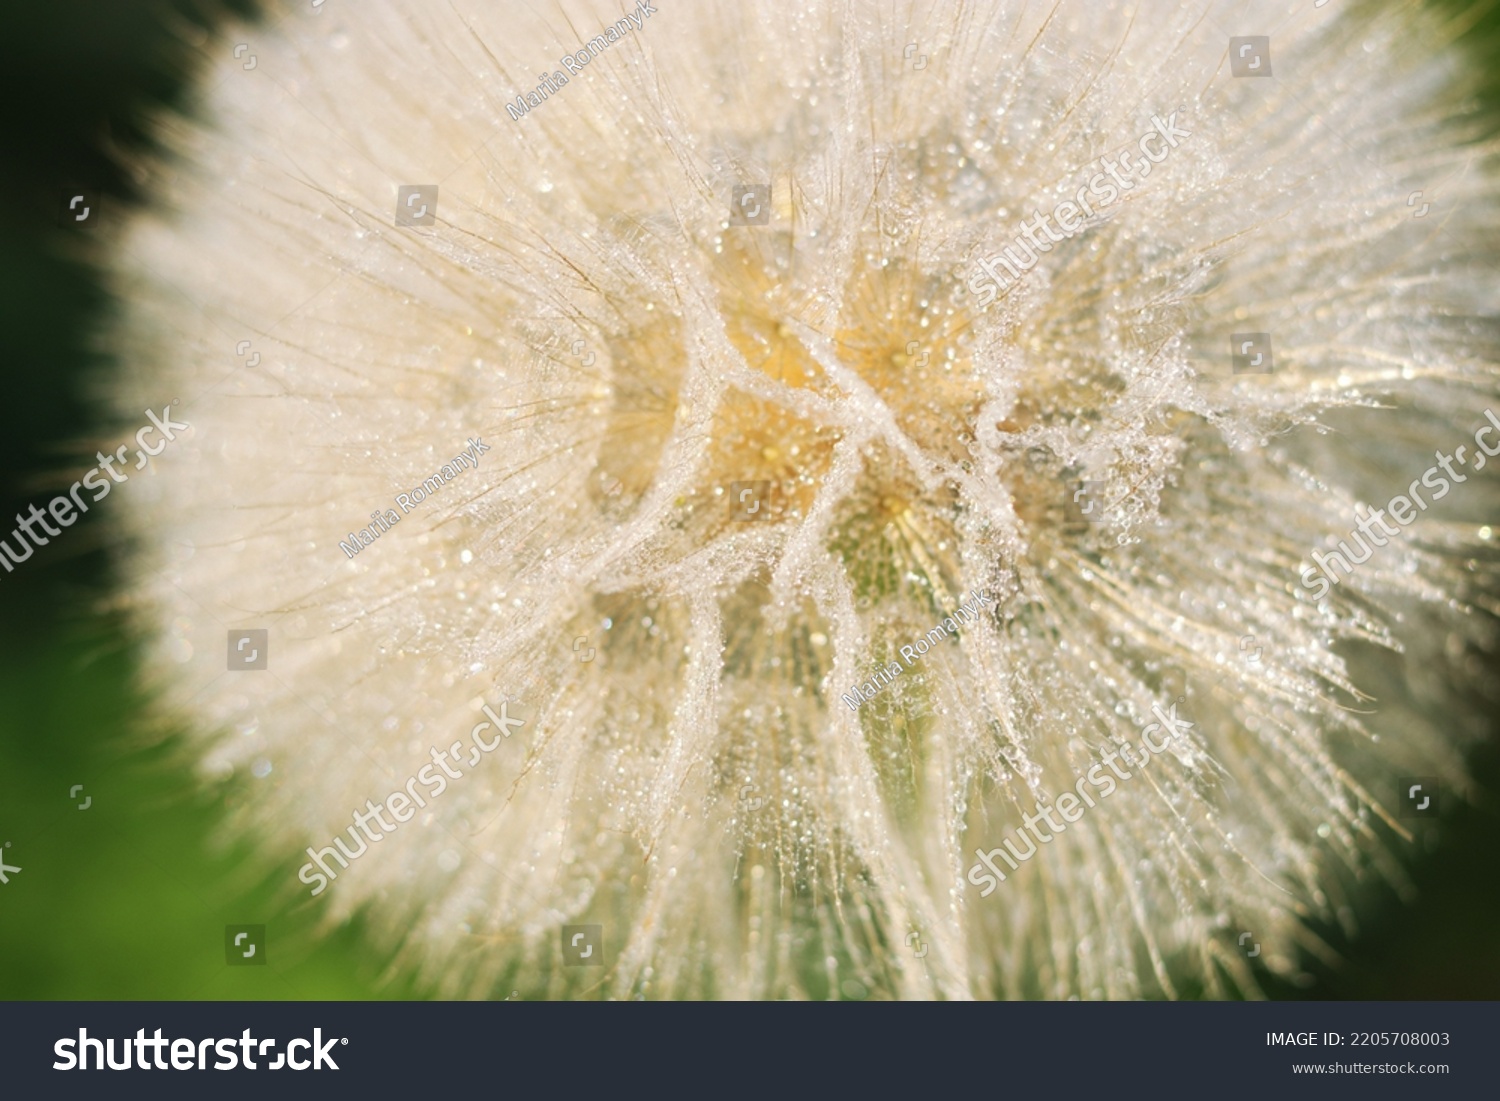 Beautiful Dandelion close-up with dew or water drops. Natural background. Fluffy dandelion with dew drops. Natural blurred spring background. Spring. Abstract dandelion flower background. After rain #2205708003